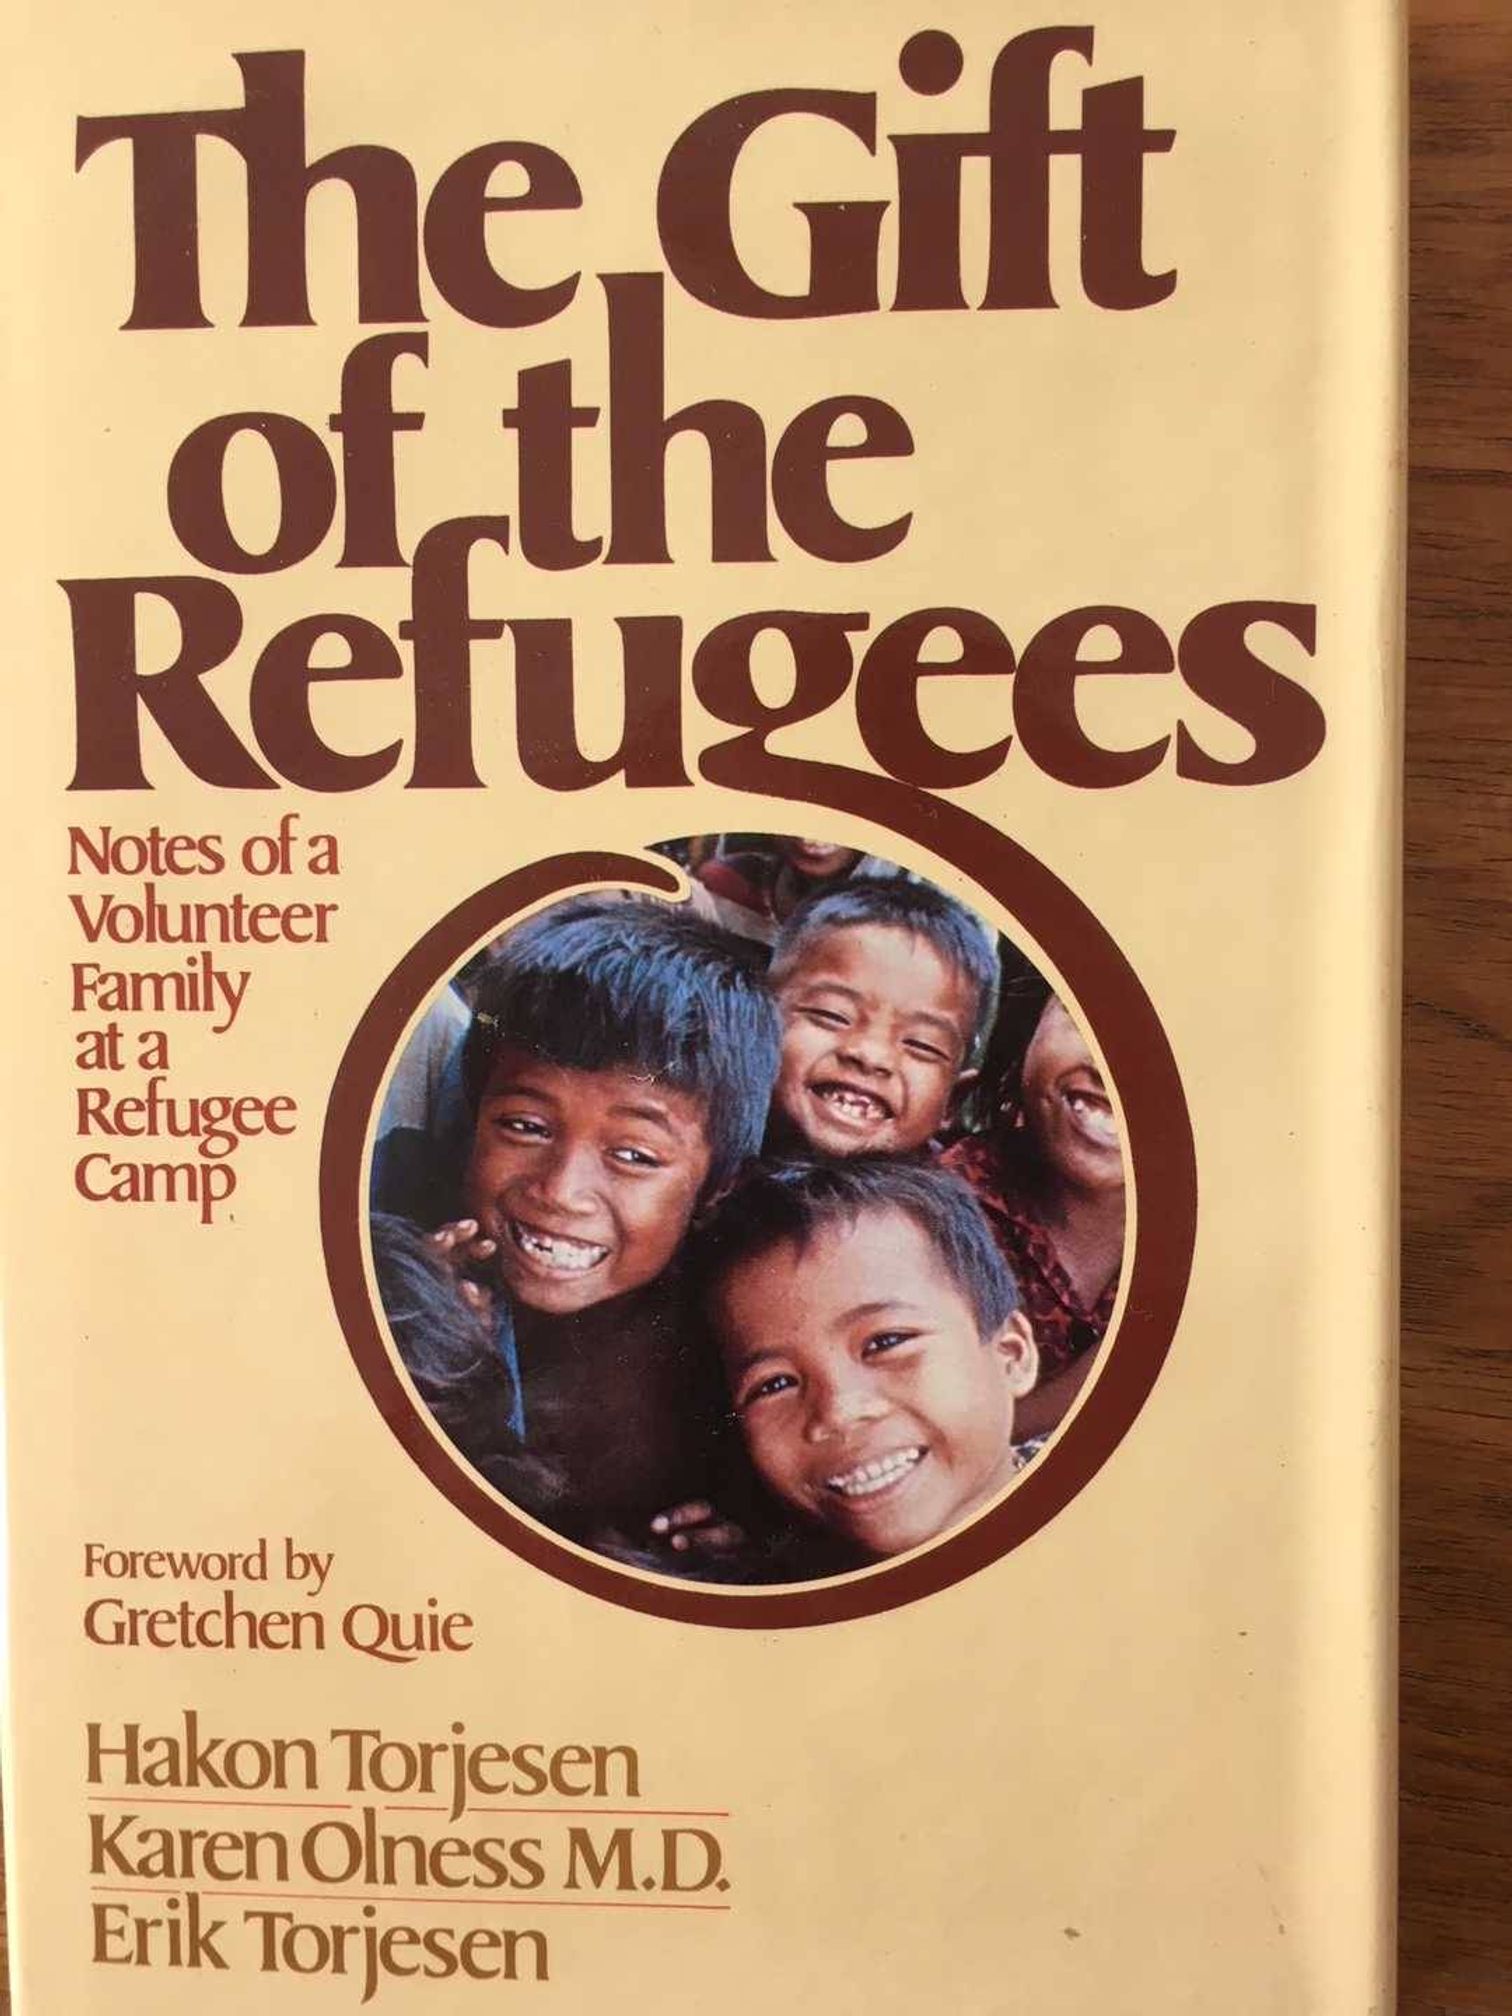 Cover of book that reads "The Gift of Refugees" featuring image of smiling group of children